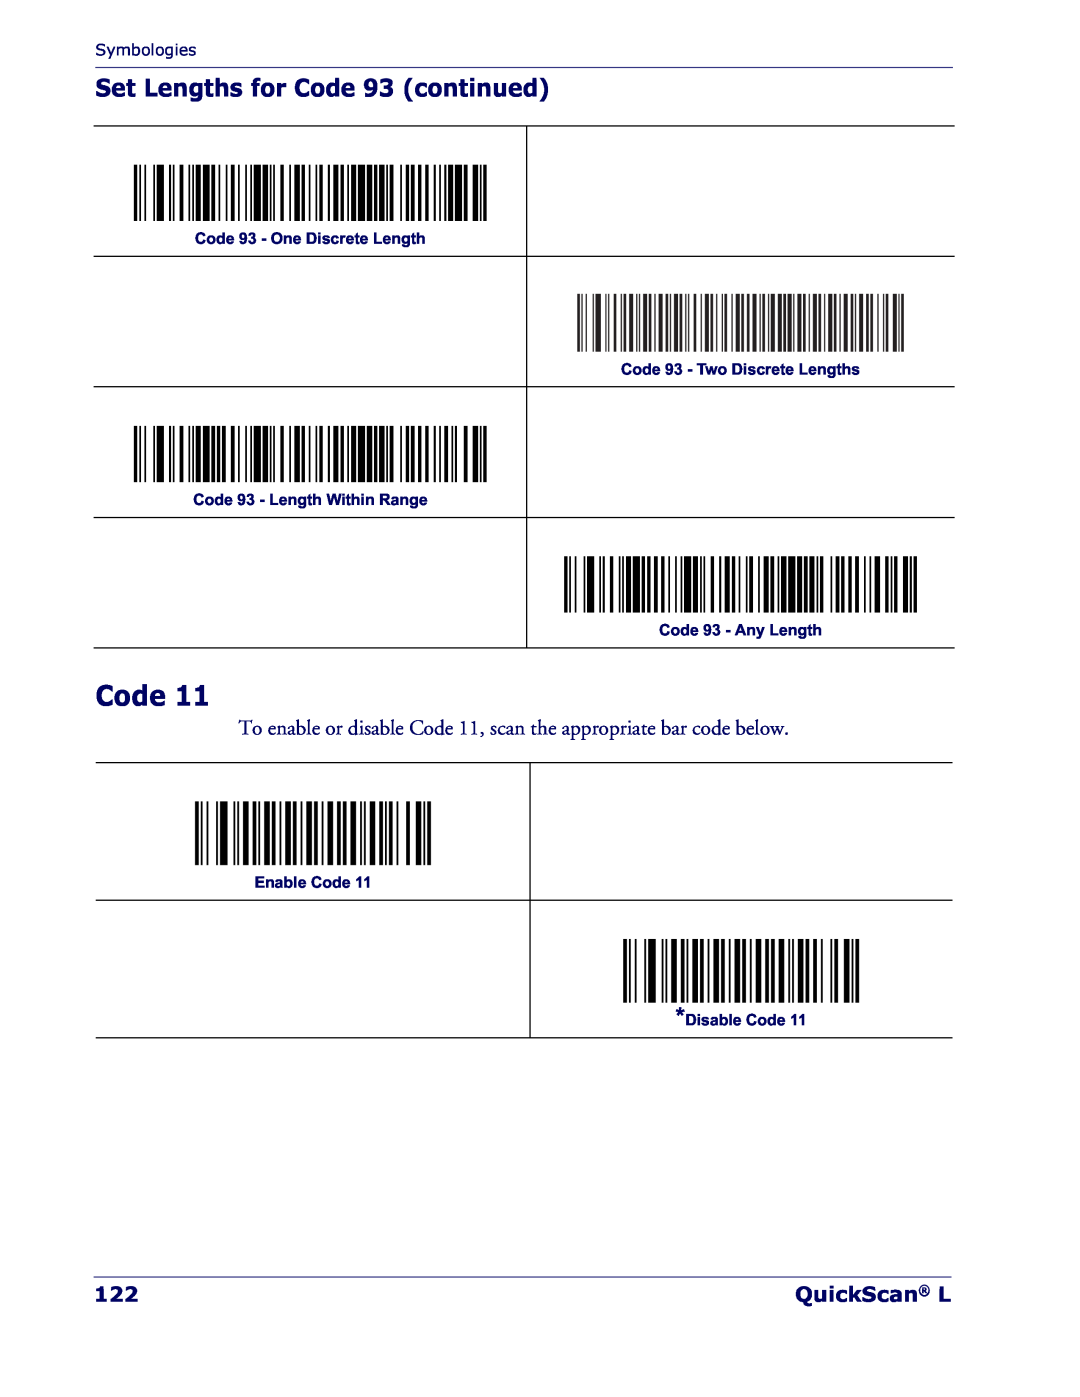 Datalogic Scanning QD 2300 manual Set Lengths for Code 93 continued, QuickScan L, Enable Code Disable Code 